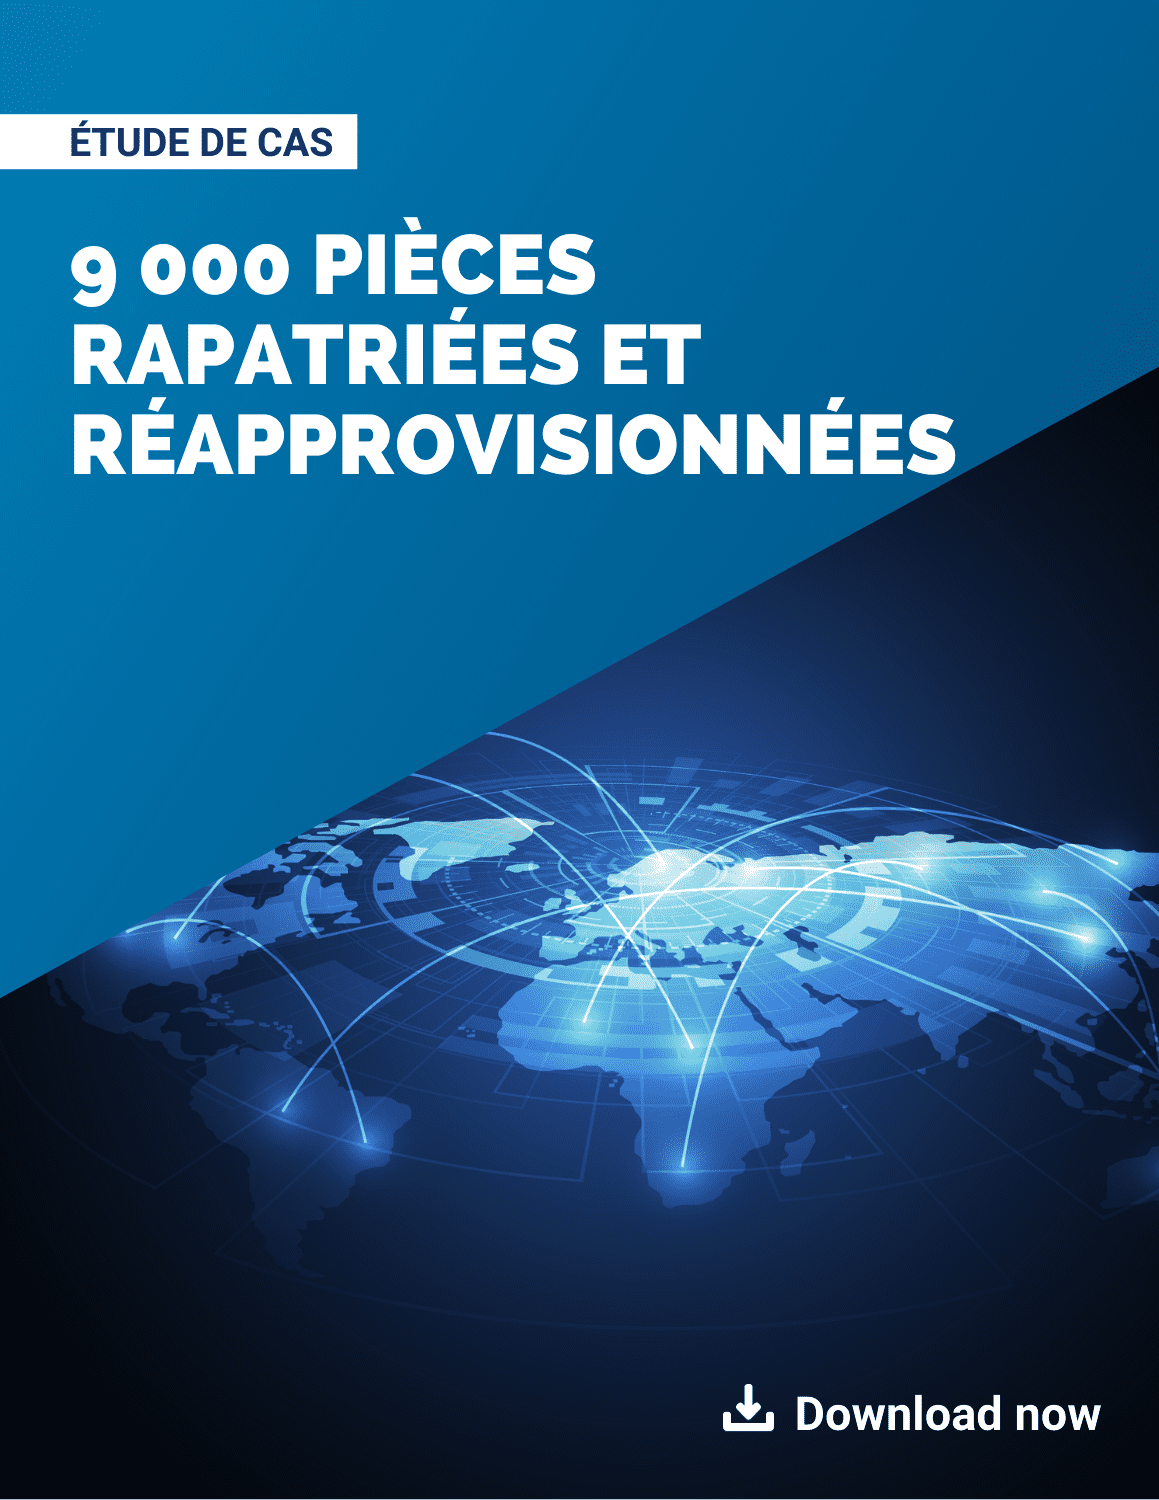 9000 pieces rapatriees et reapprovisionnees